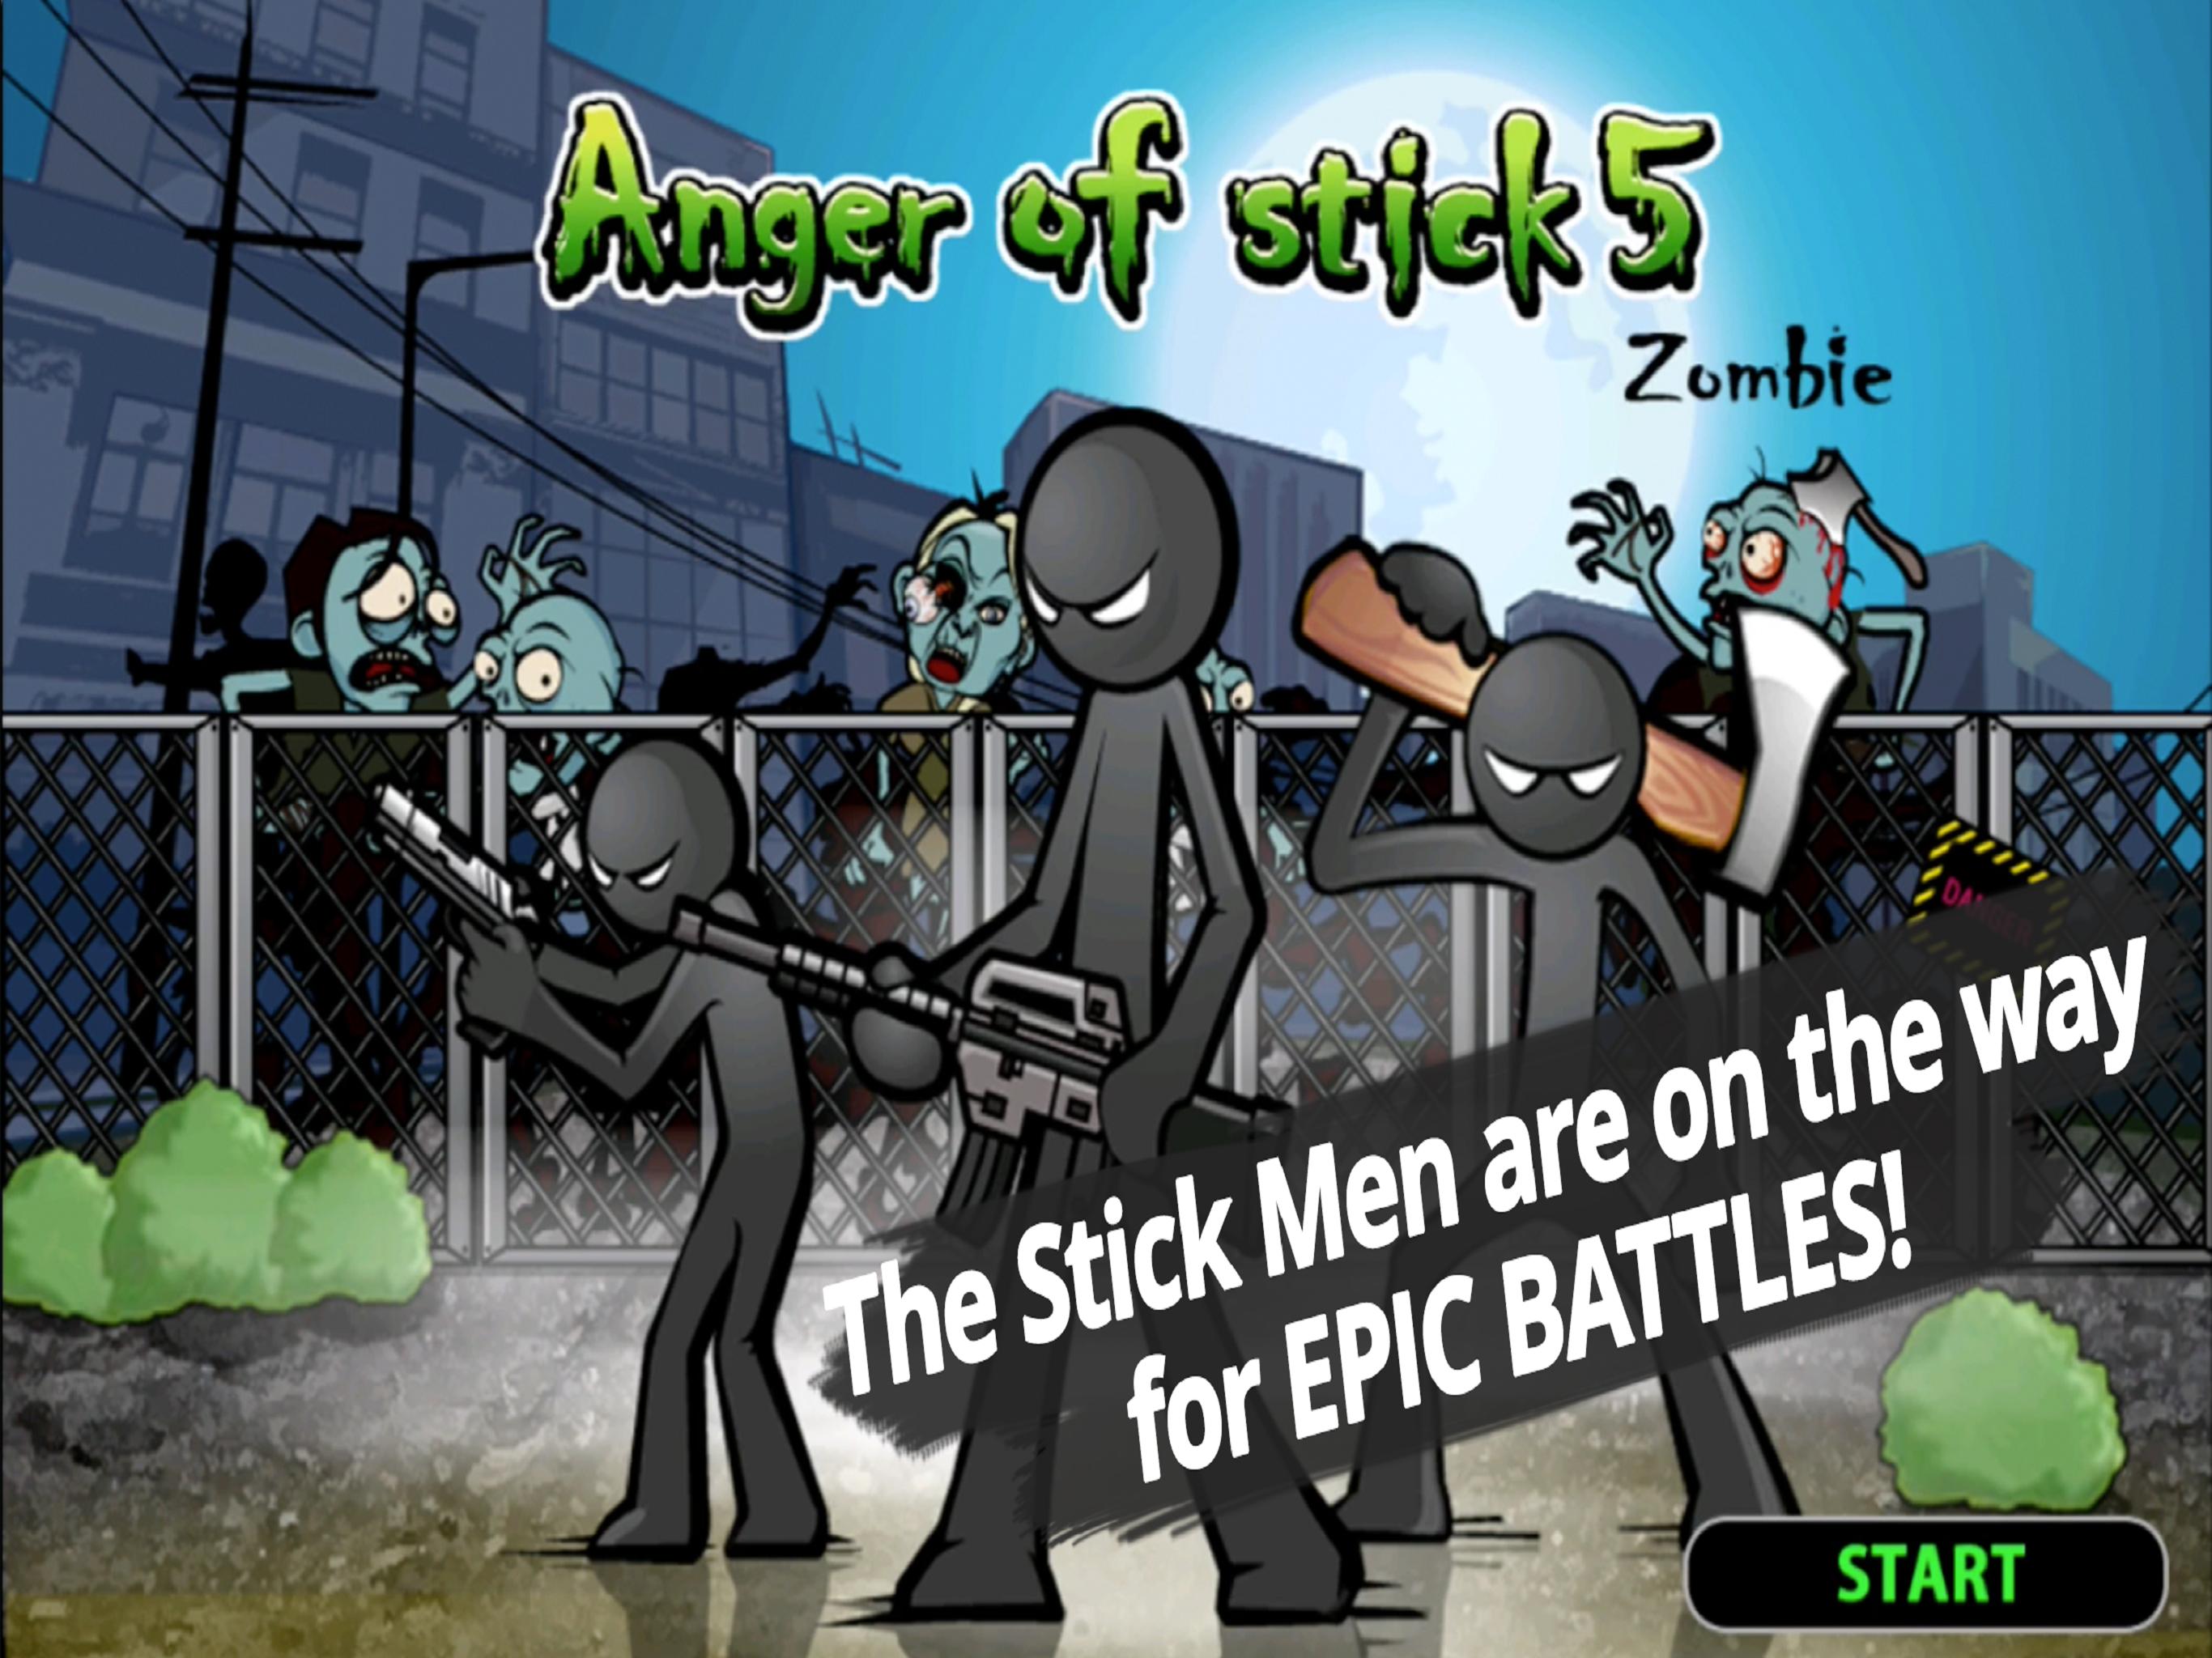 Anger of Stick 5: Zombie. Anger of Stick 6. Anger of Stick 4 Hero info. Anger of Stick 5 background.